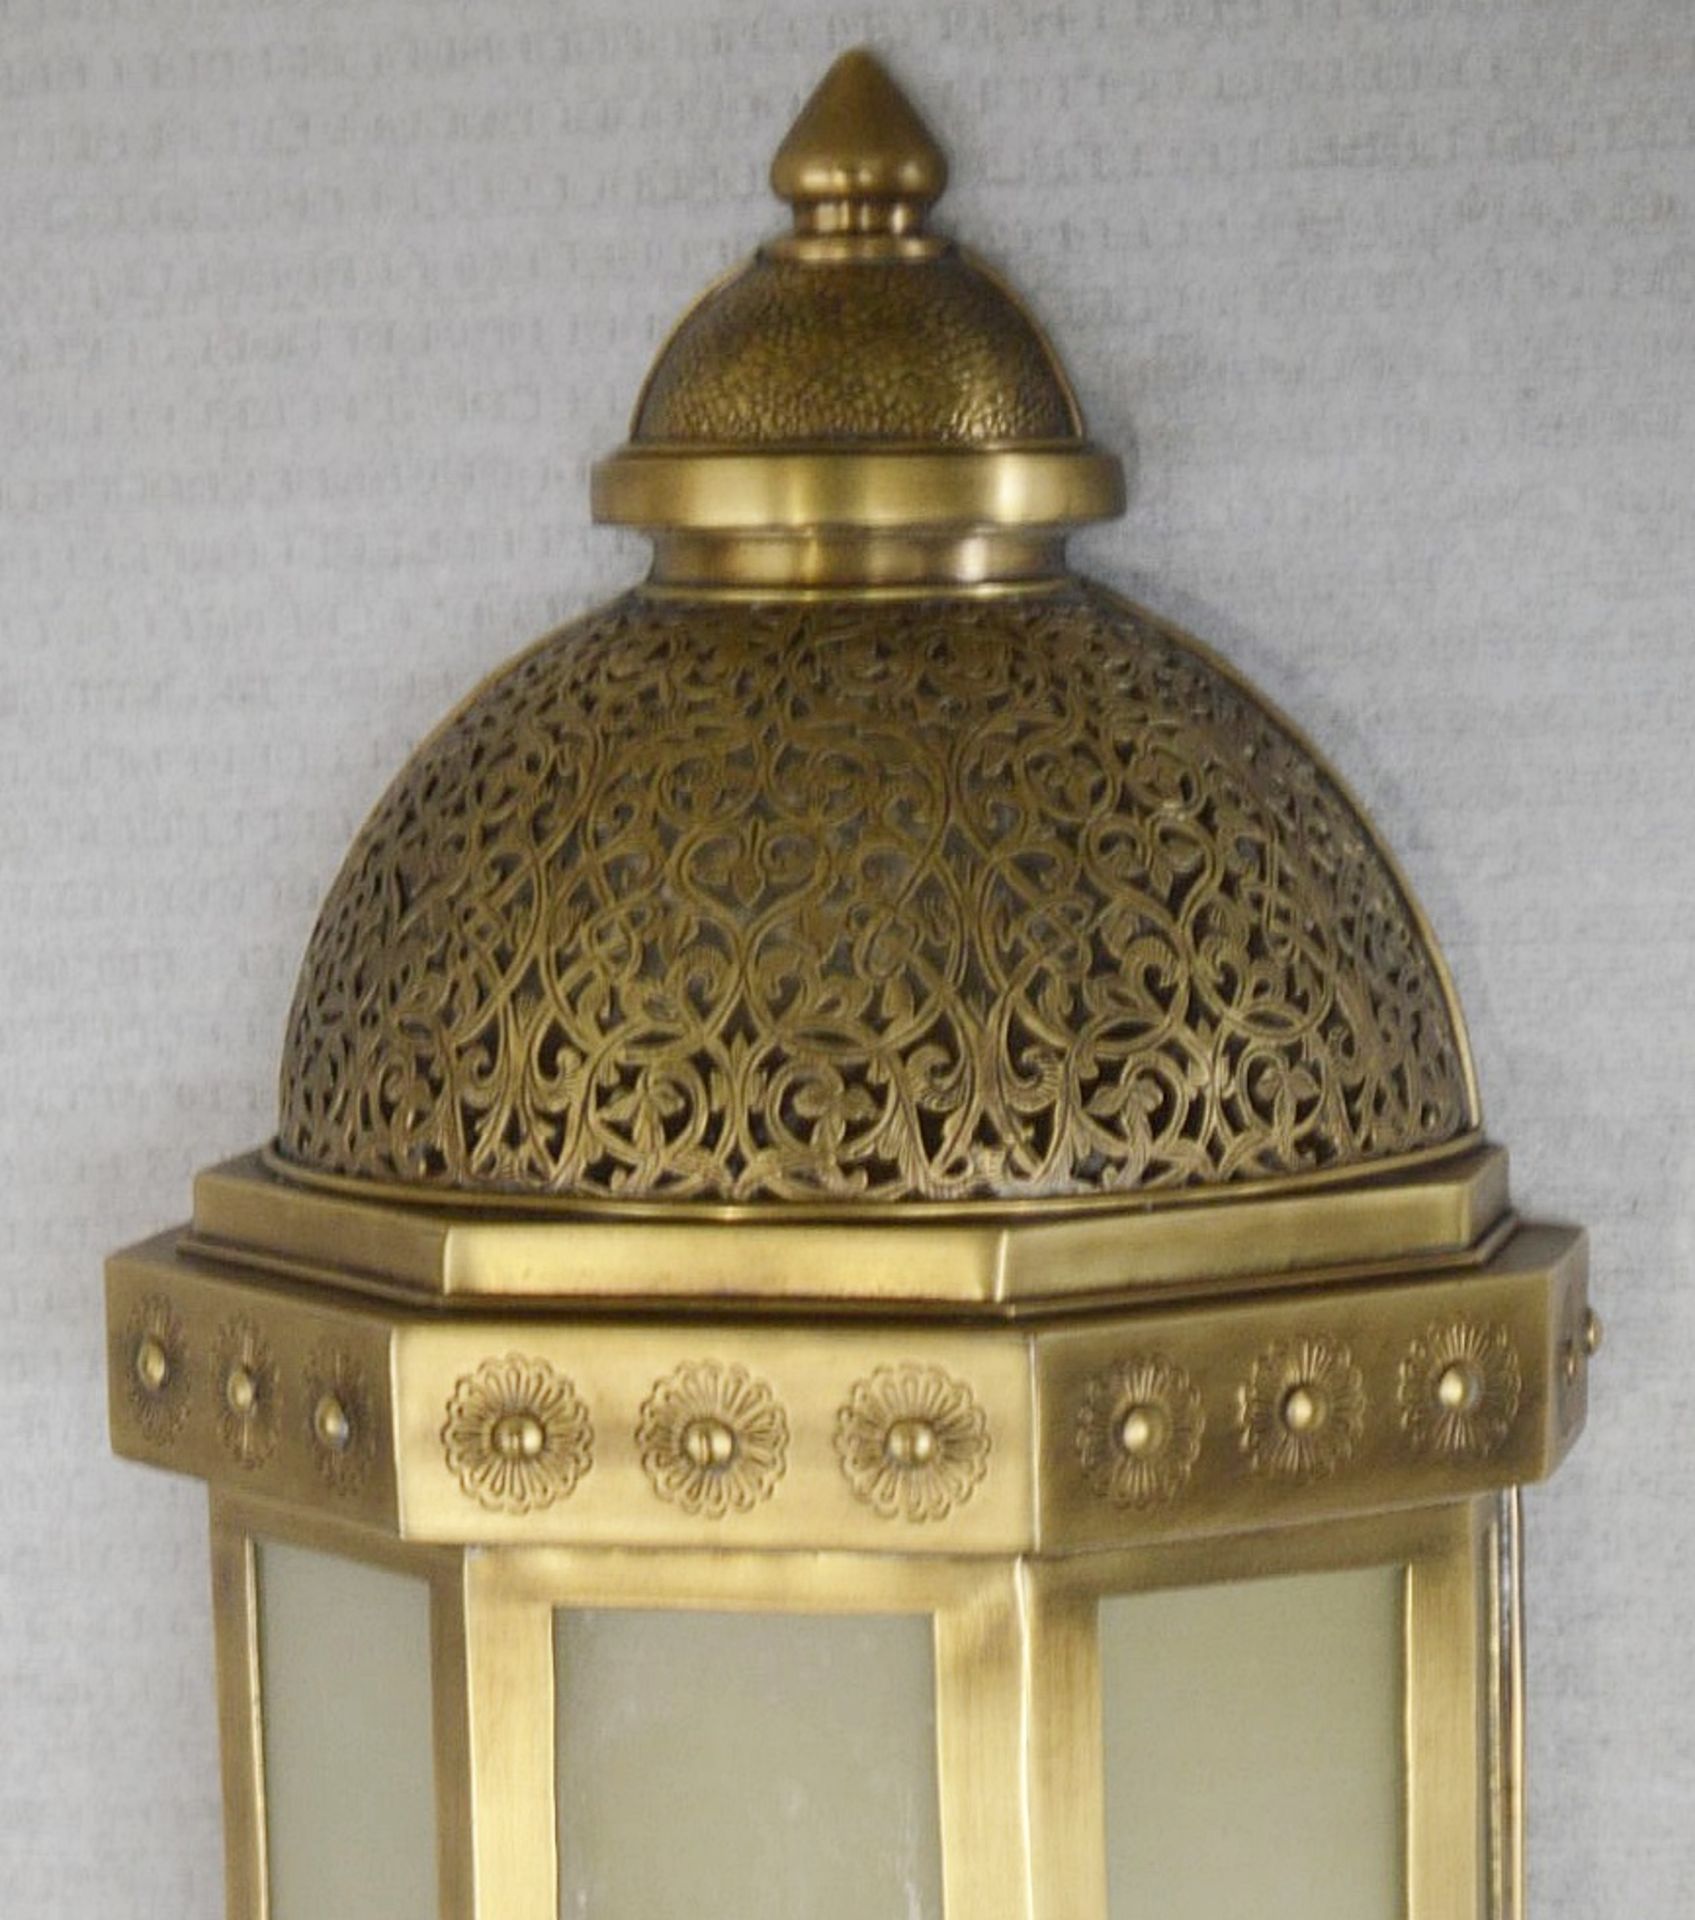 1 x Moroccan-style Brass Wall Light Featuring Intricate Filigree Detailing - Dimensions: Height 80cm - Image 6 of 6